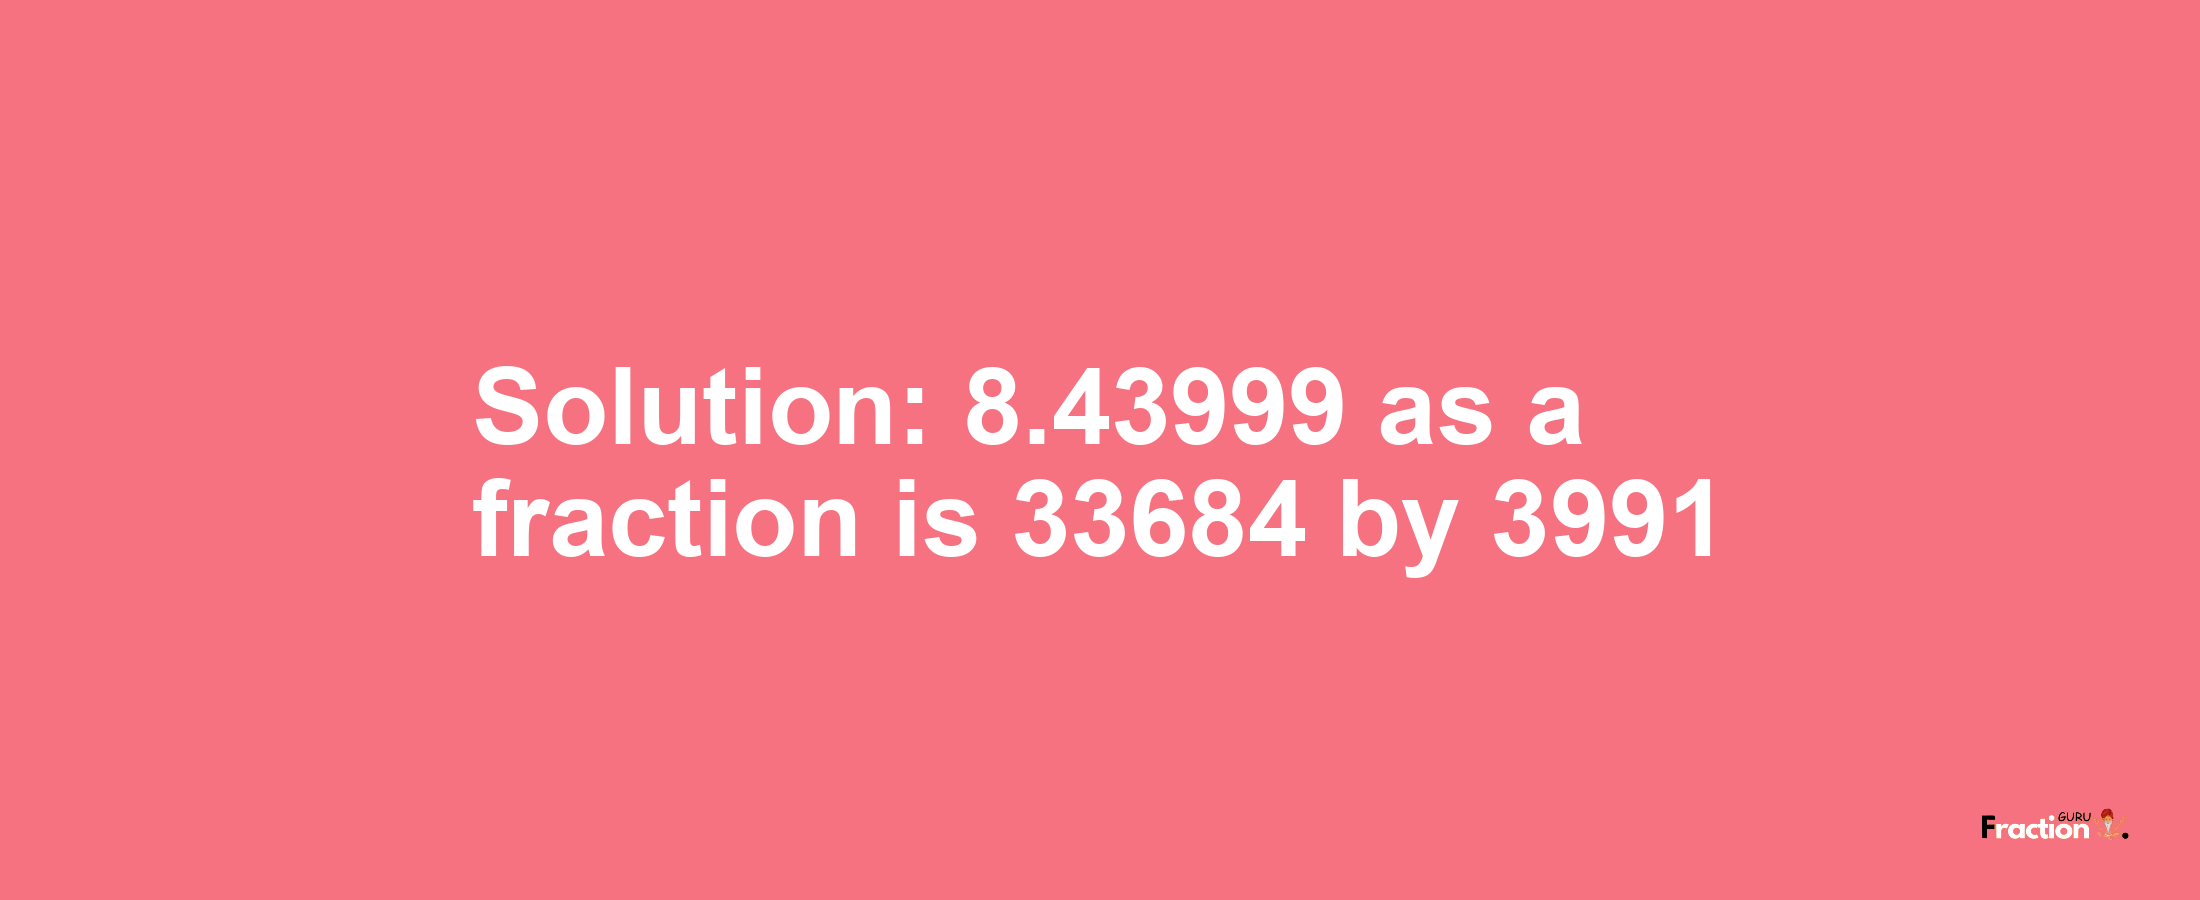 Solution:8.43999 as a fraction is 33684/3991